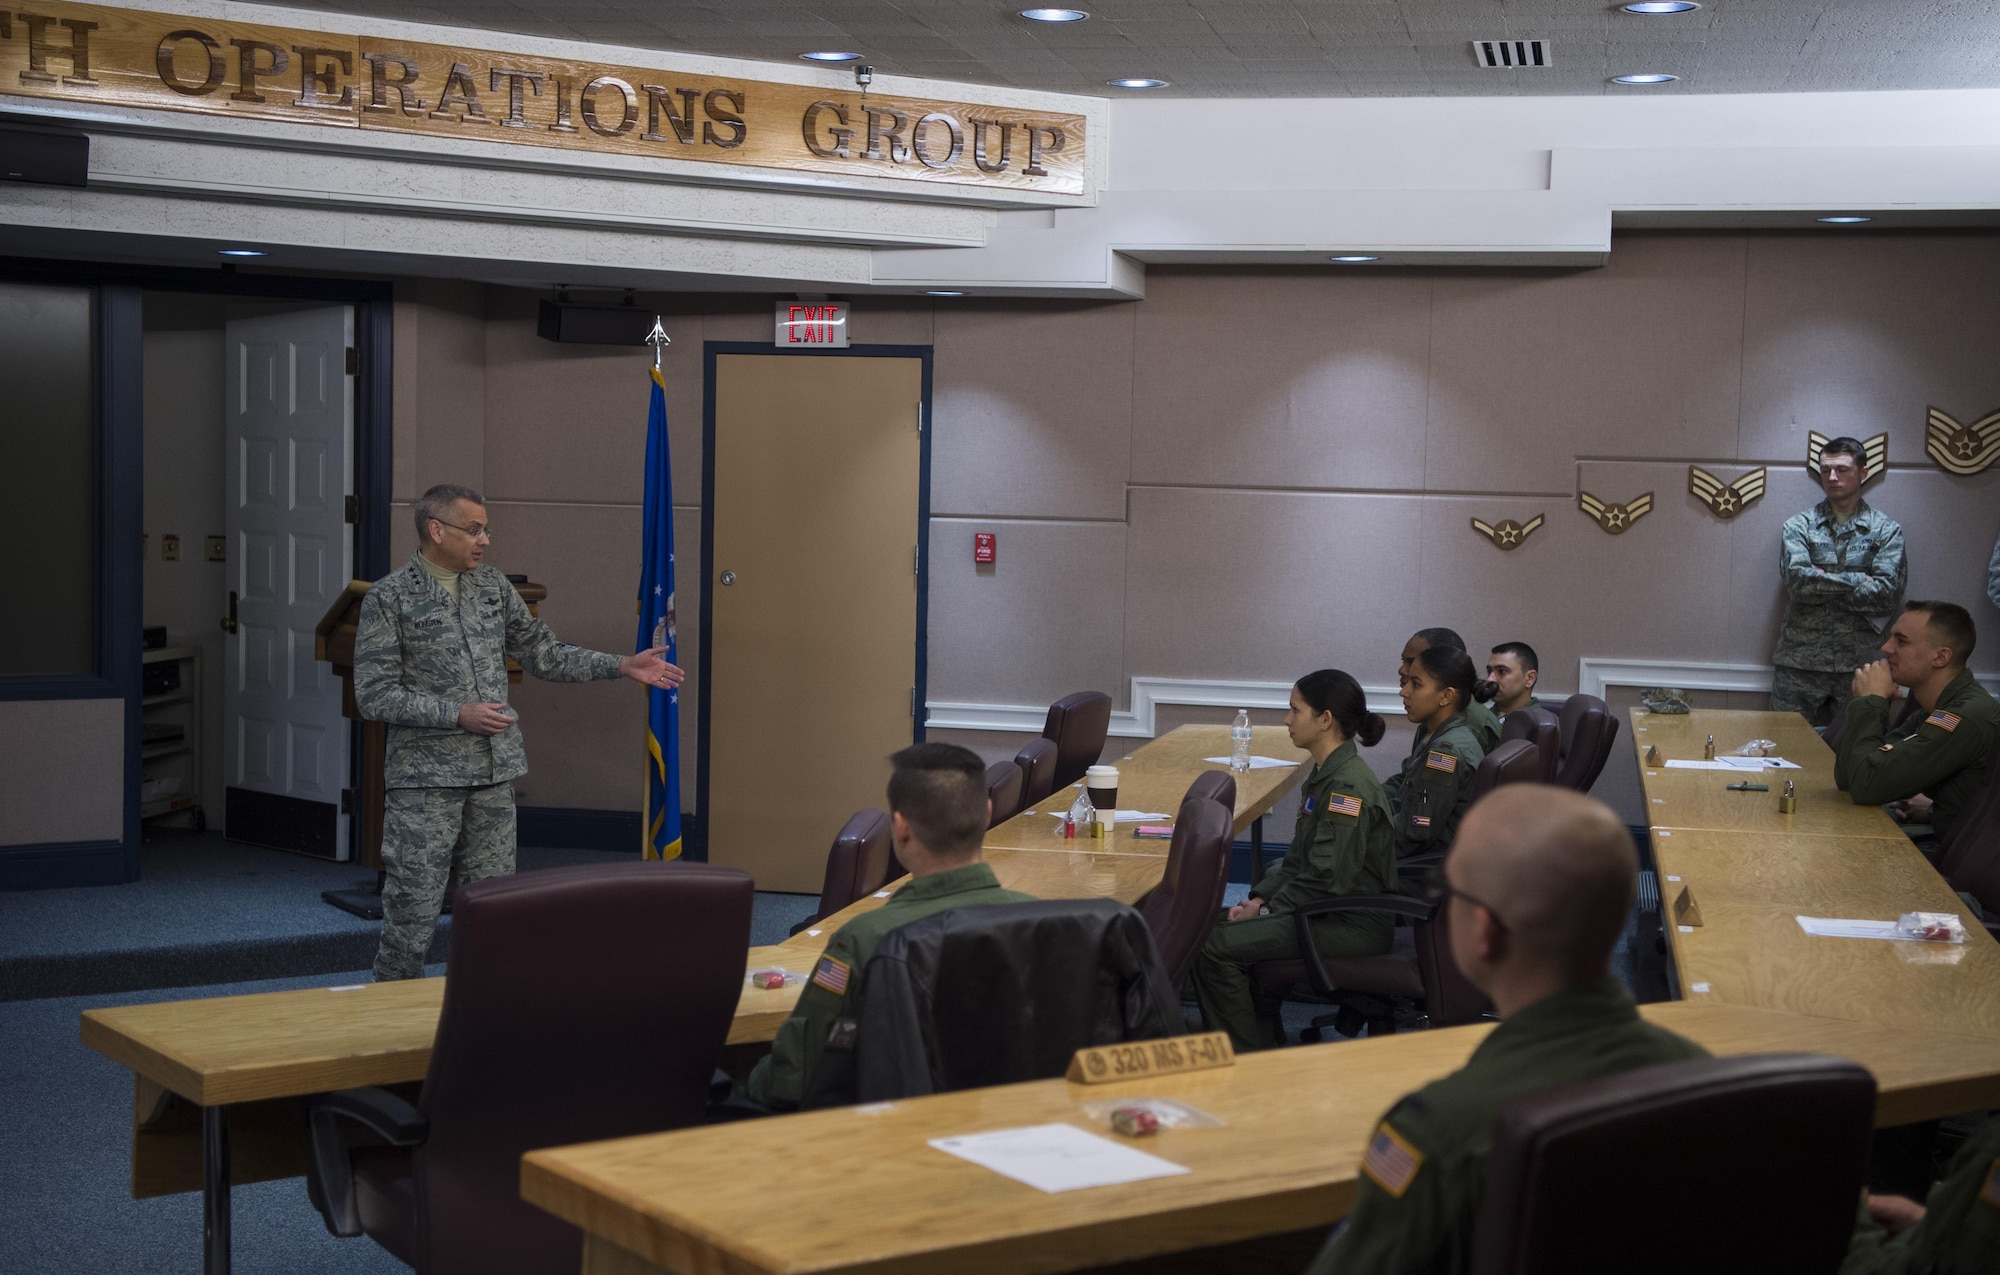 Lt. Gen. Jack Weinstein, Deputy Chief of Staff for strategic deterrence and nuclear integration, addresses missile combat crews at their pre-departure briefing at F.E. Warren Air Force Base, Wyo., Dec. 8, 2016. Air Force Global Strike Command has initiated a number of action-oriented efforts designed to drive changes to the ICBM mission and culture. (U.S. Air Force photo by Staff Sgt. Christopher Ruano)